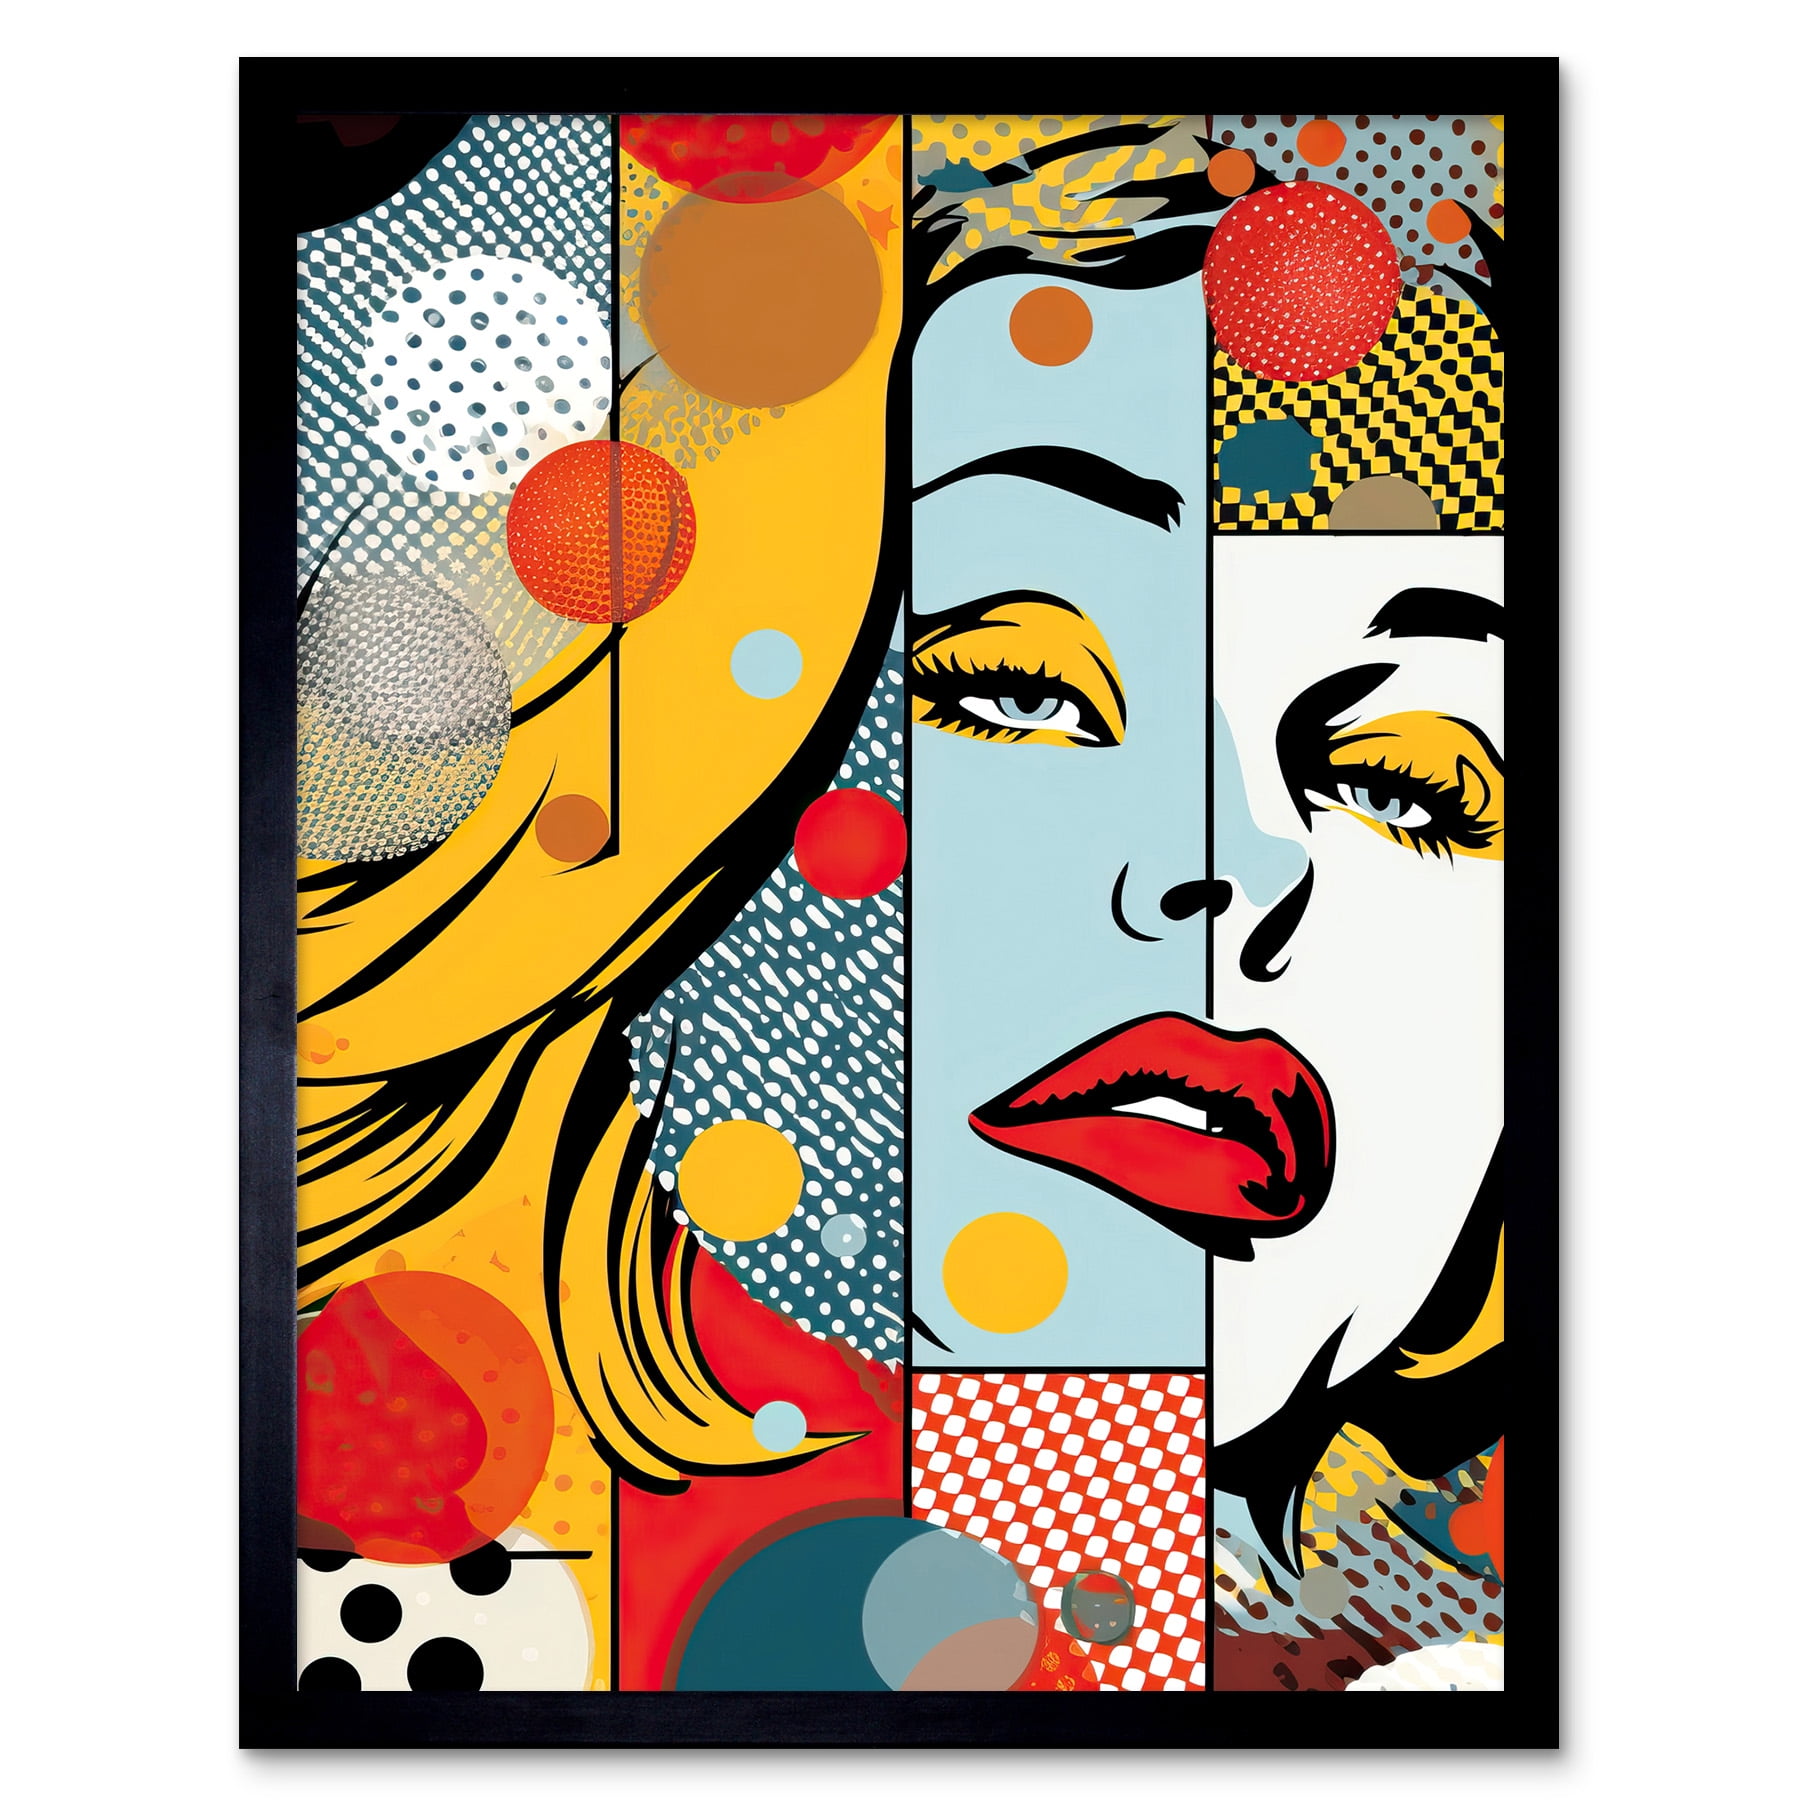 Abstract Geometric Patterns and Bubbles with Woman Face Comic Book Style  Pop Art Halftone Large Wall Art Poster Print Thick Paper 18X24 Inch